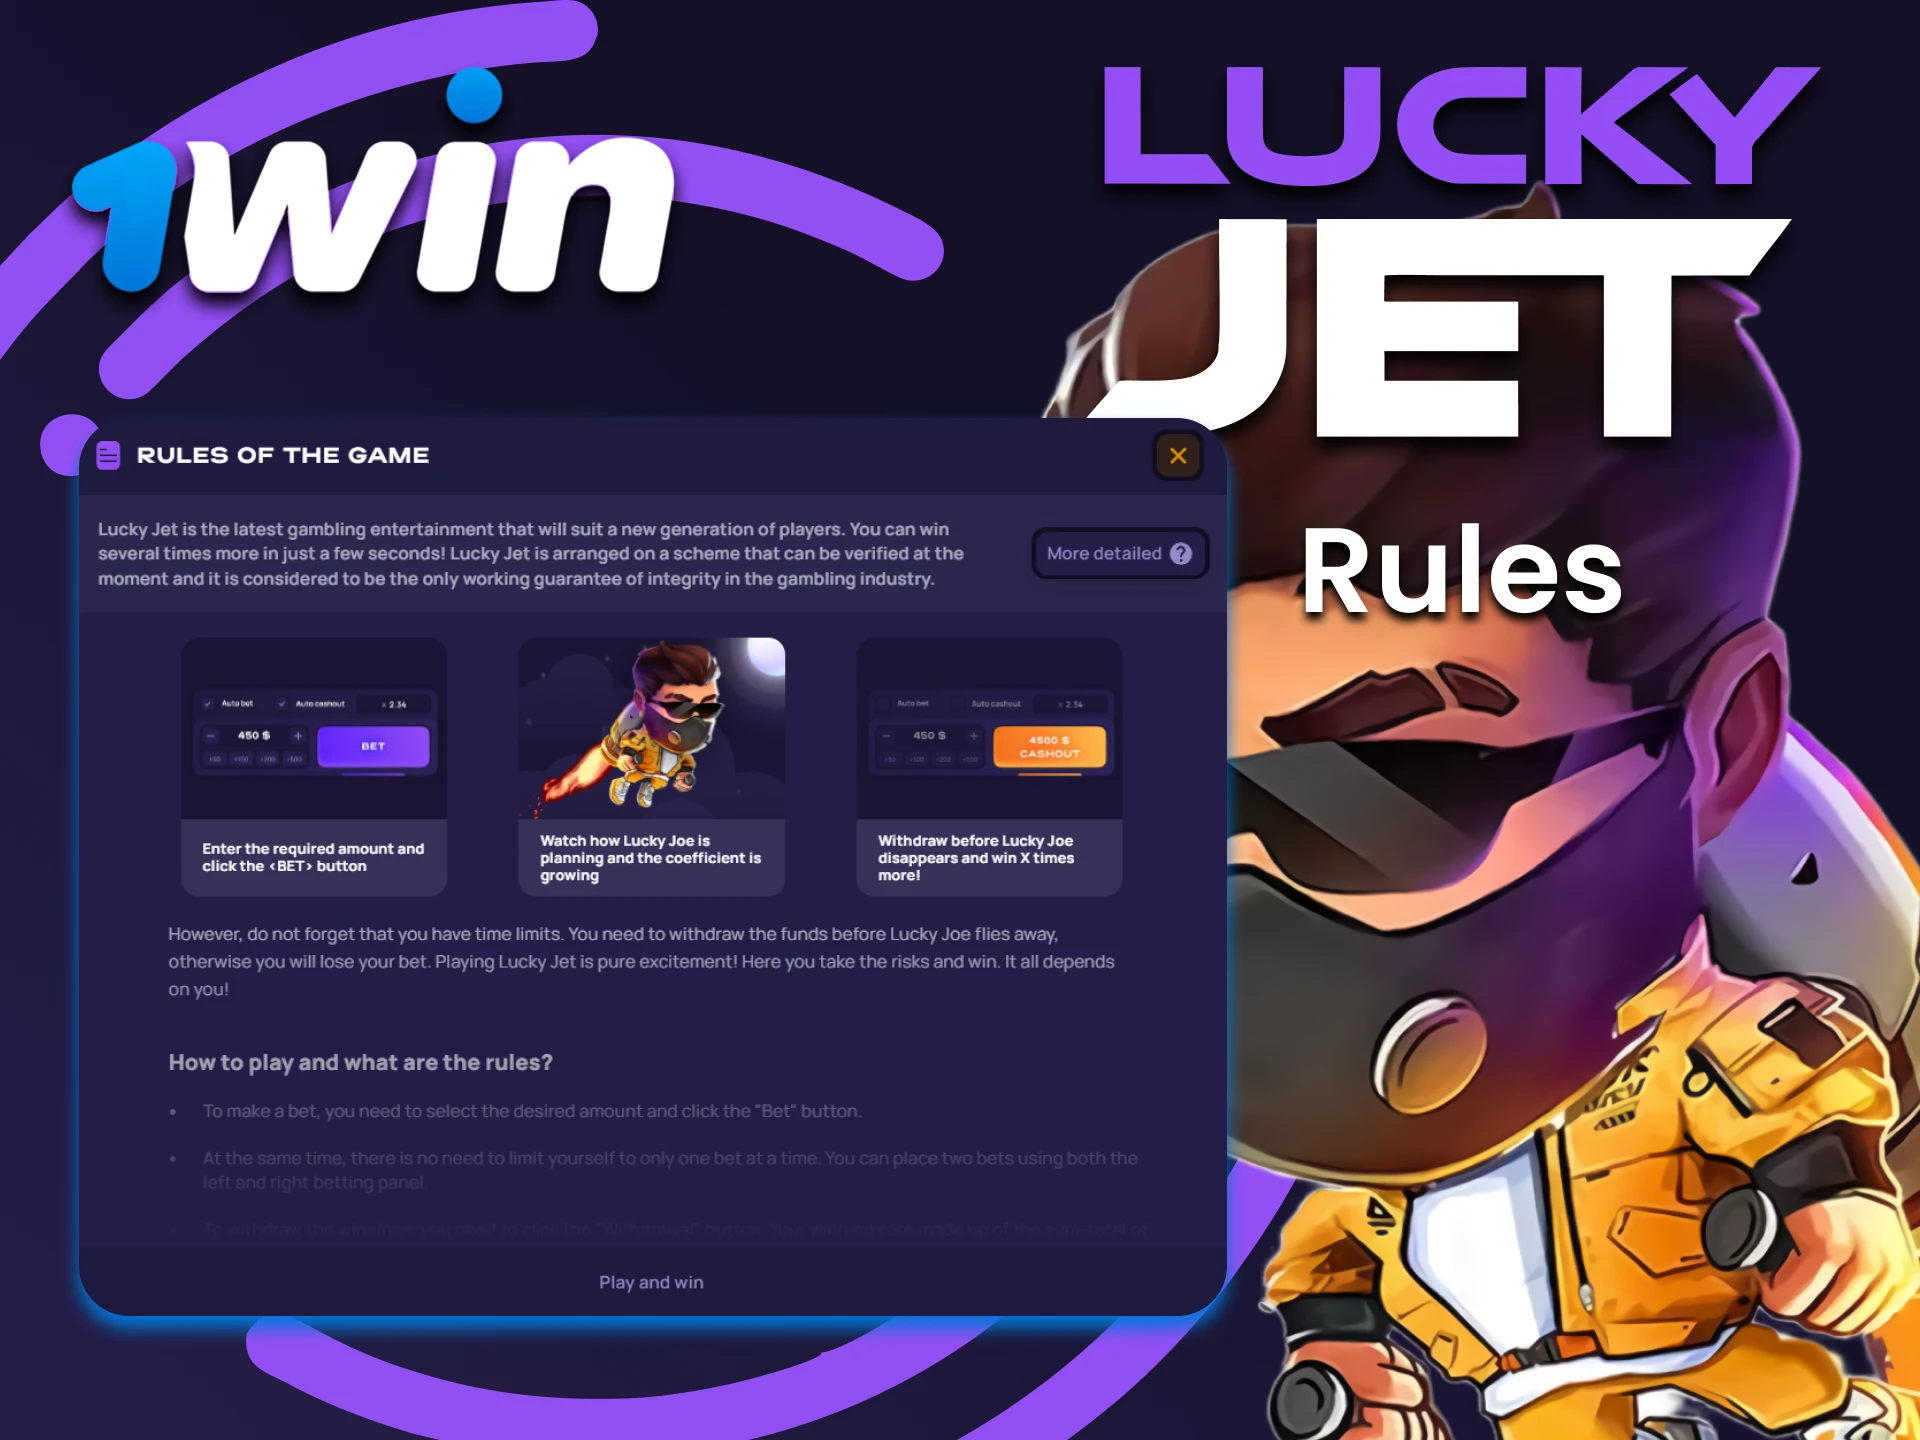 Learn the rules of the game Lucky Jet on 1win.